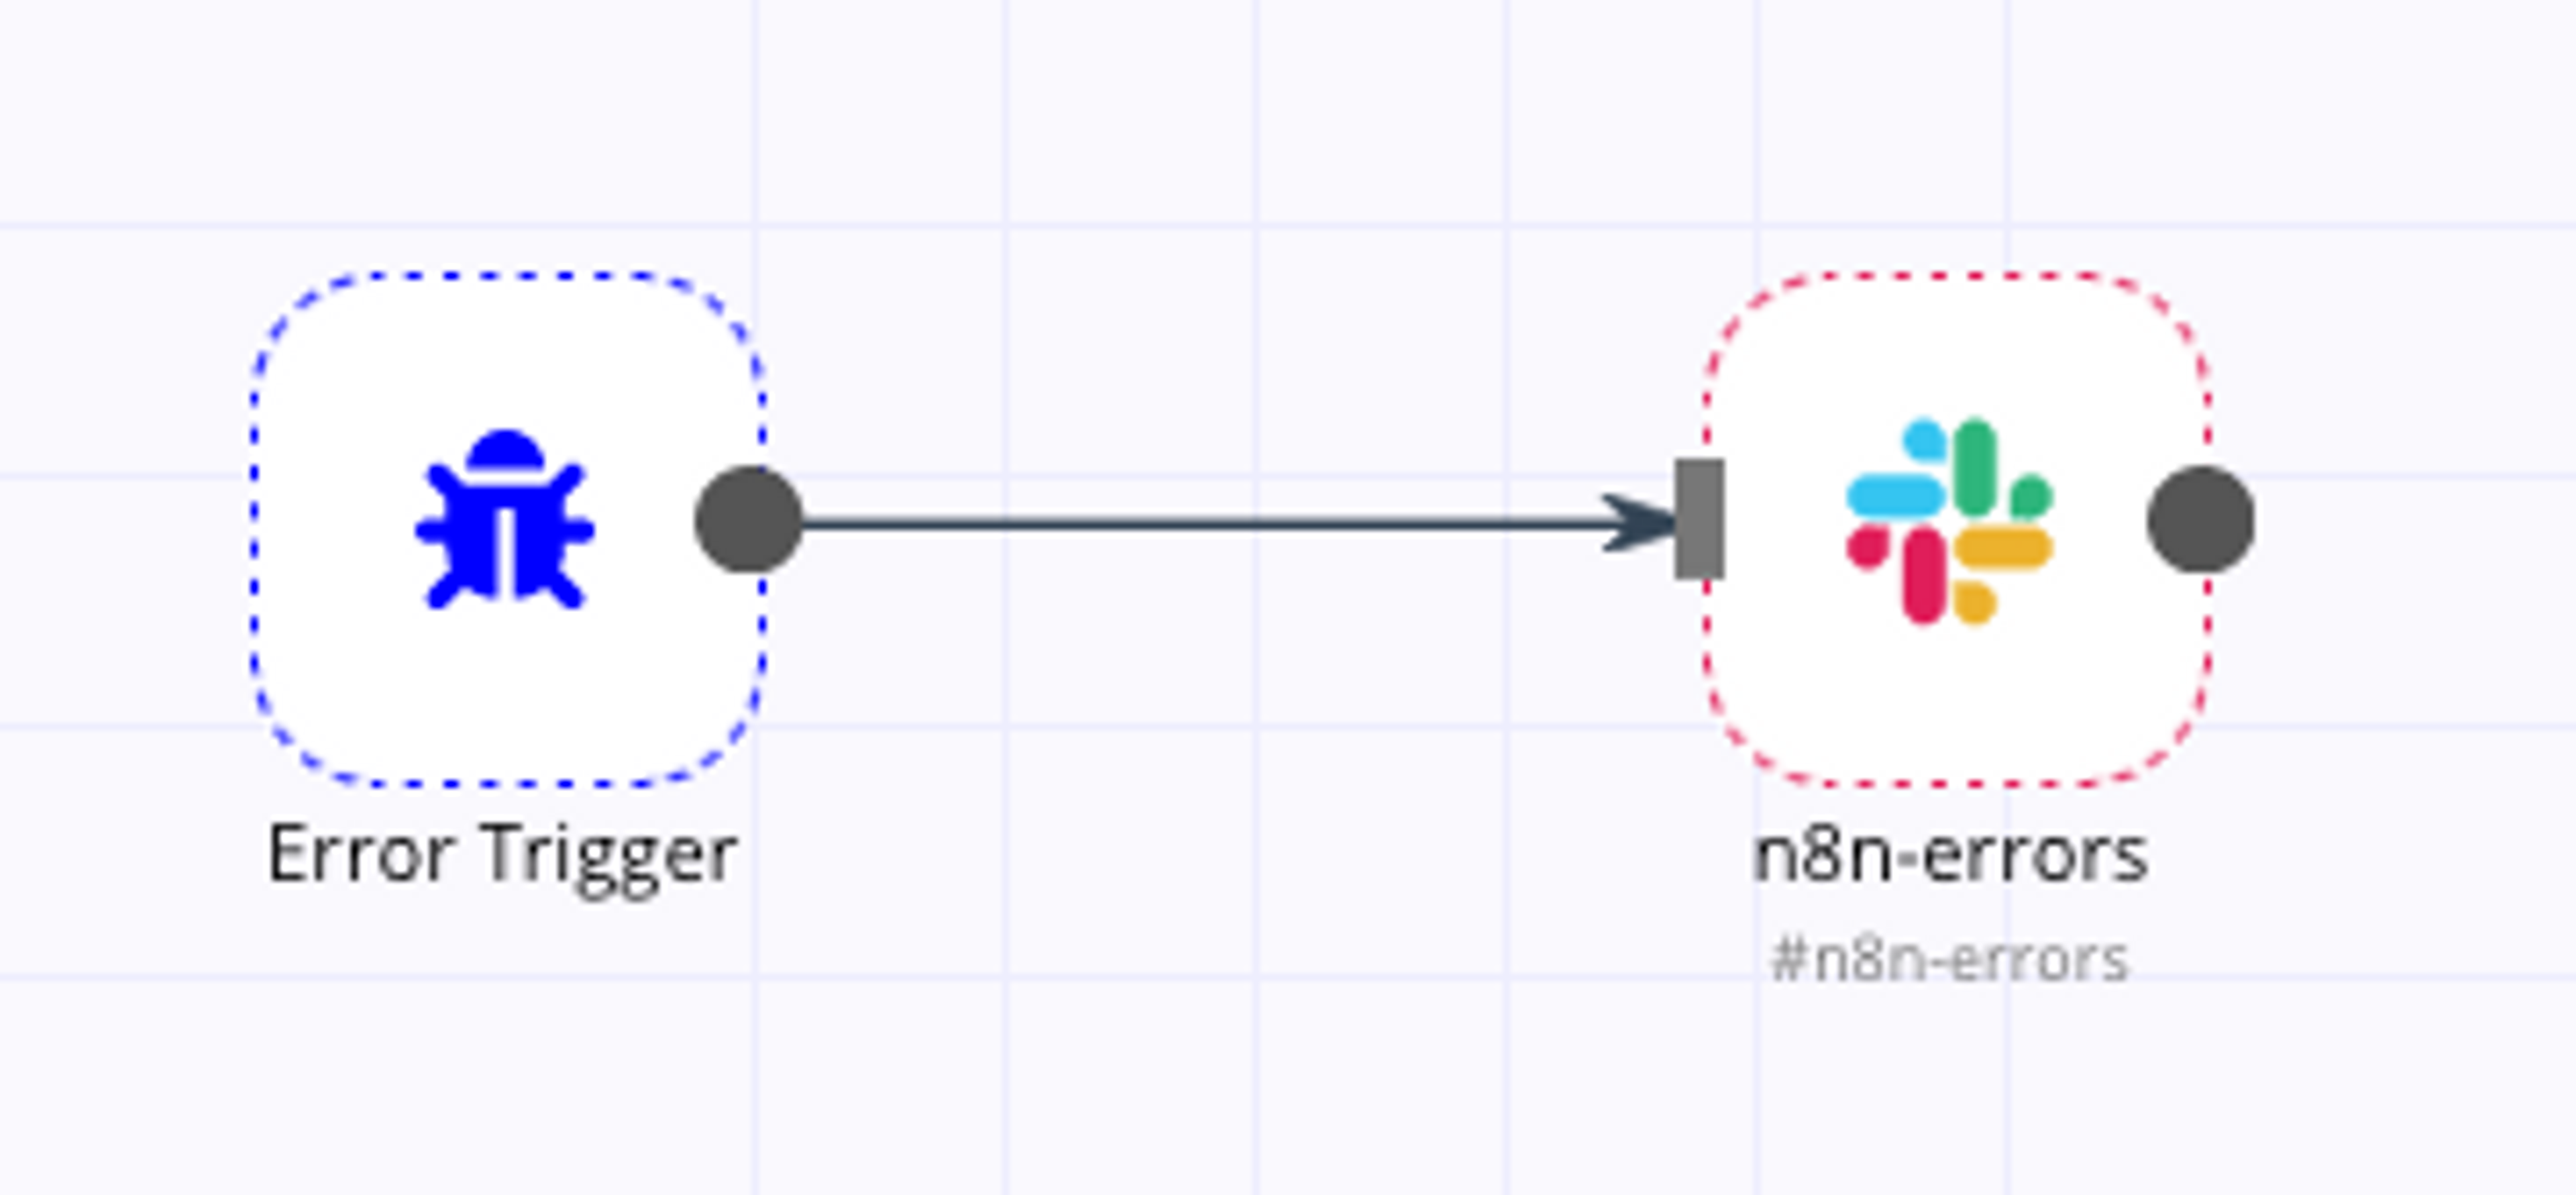 Diagram in n8n with "Error Trigger" on the left and Slack #n8n-errors on the right